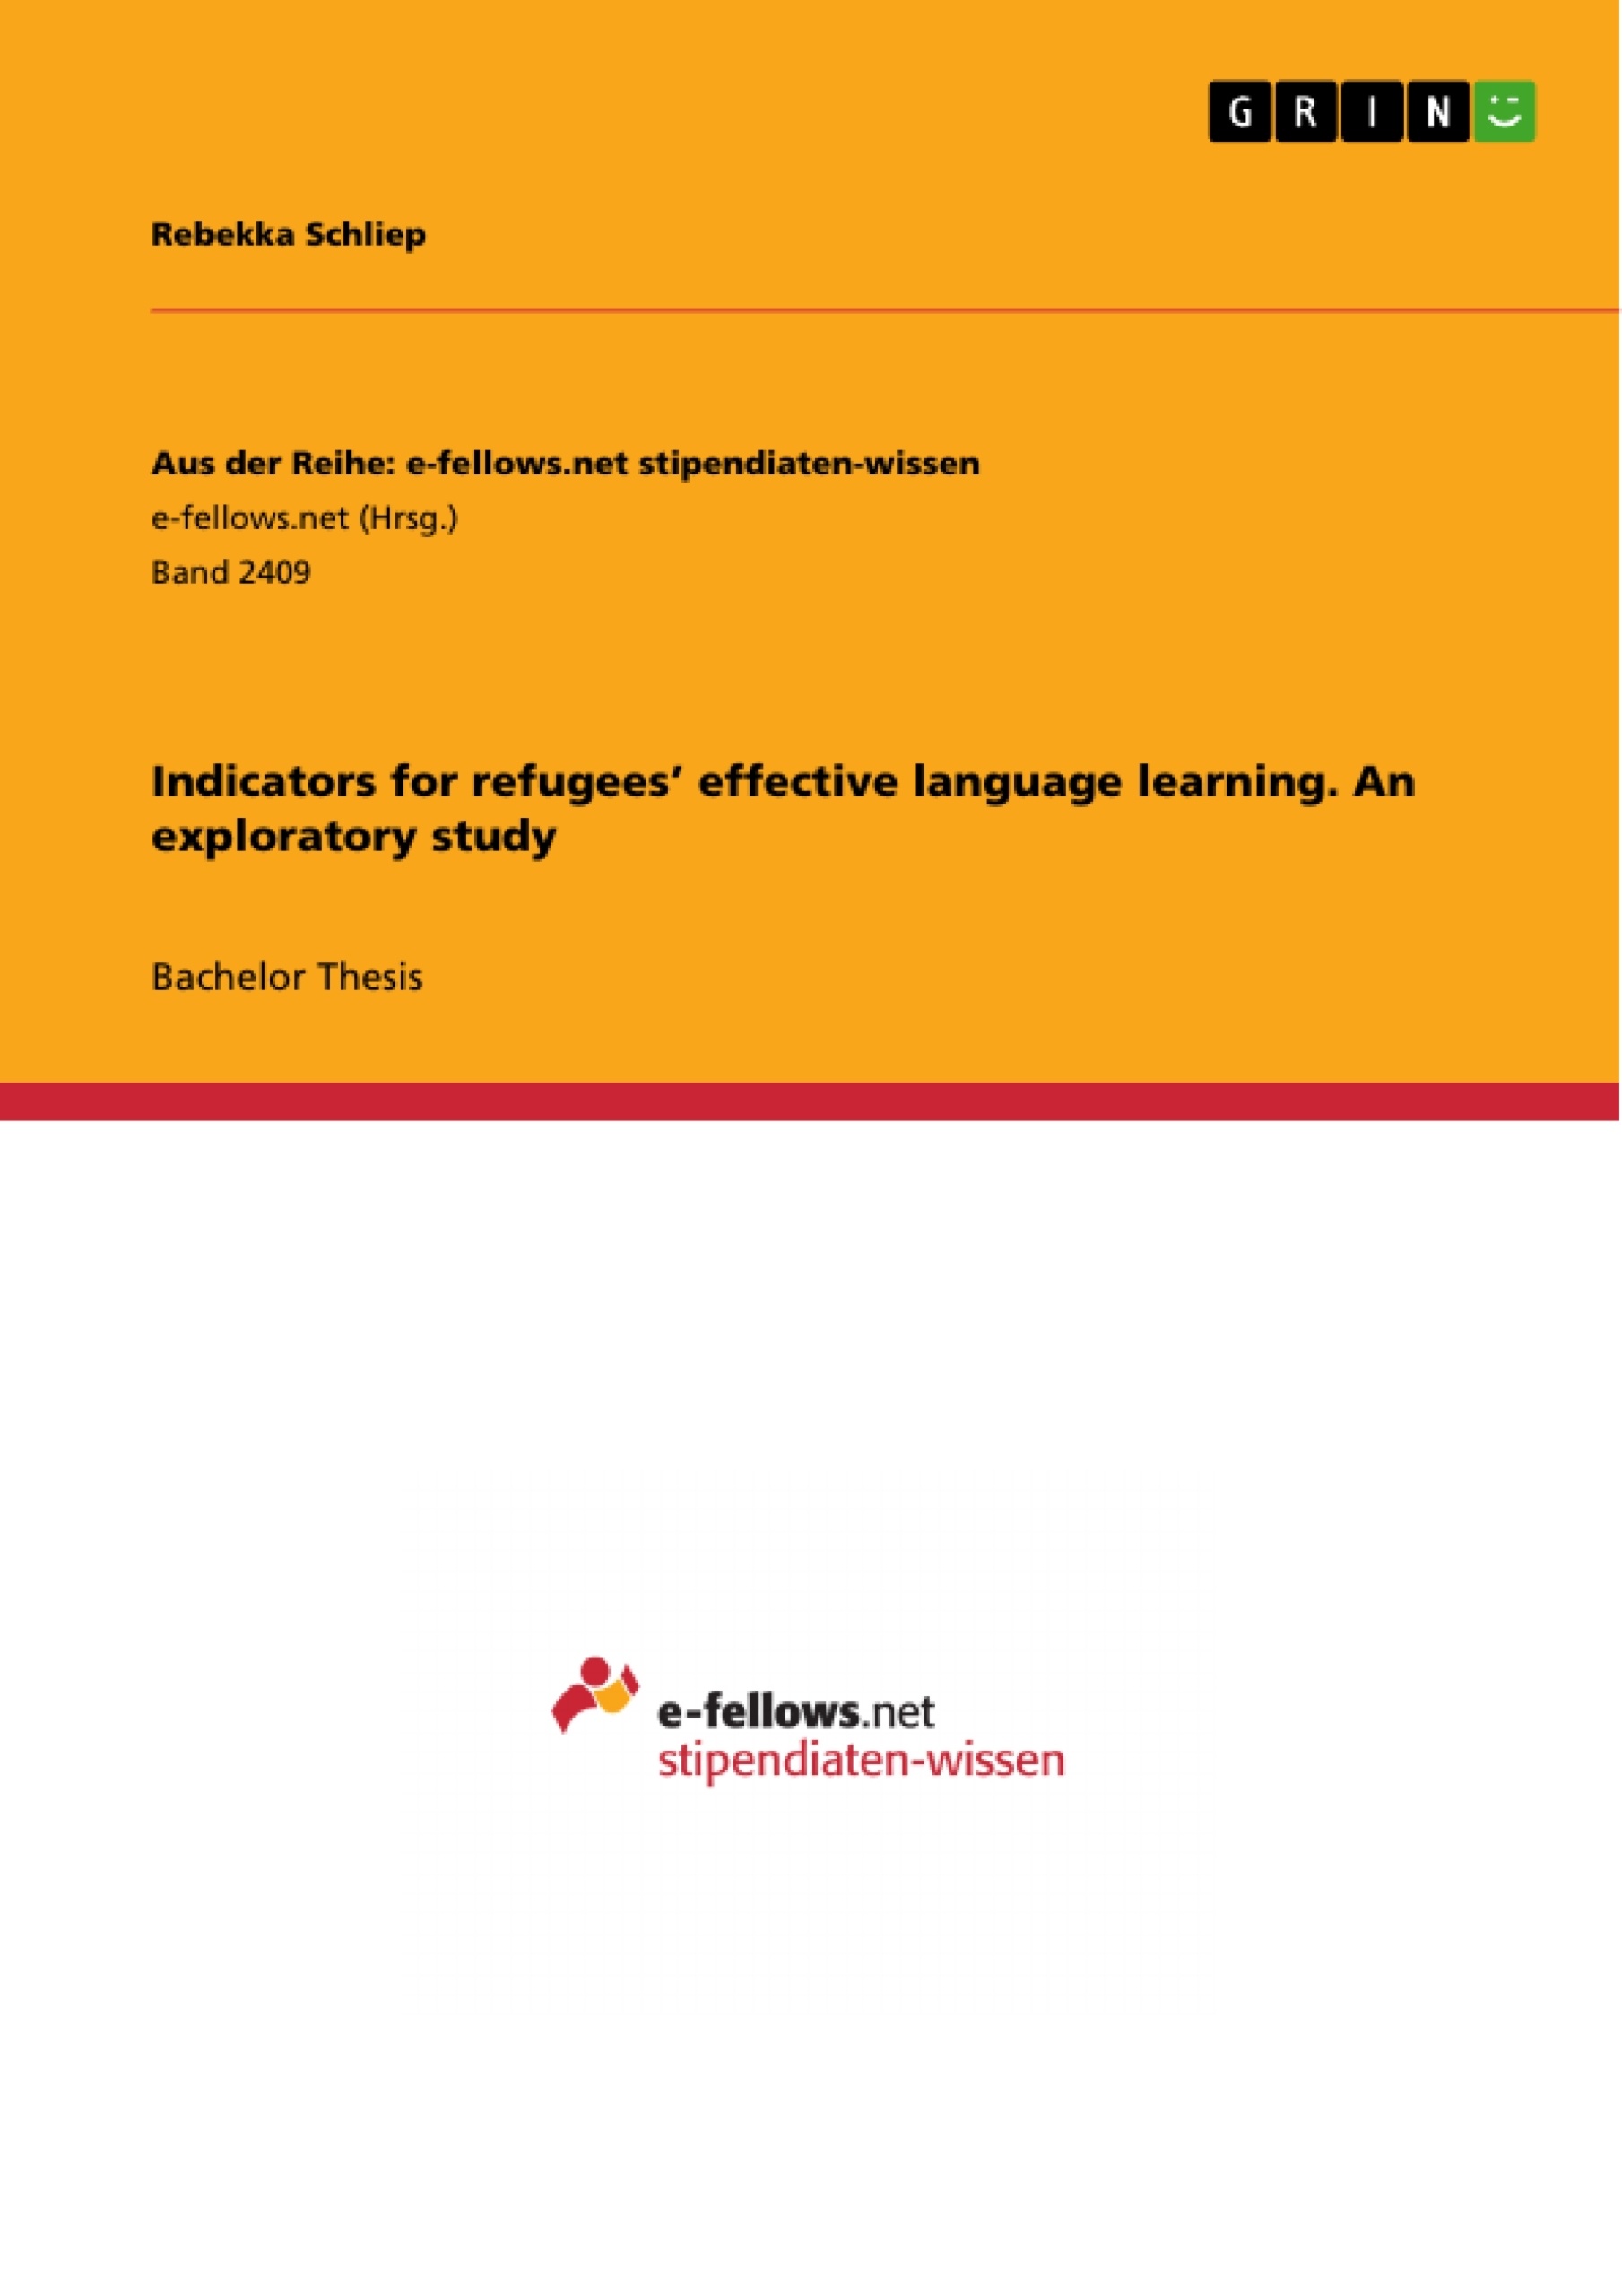 Title: Indicators for refugees’ effective language learning. An exploratory study